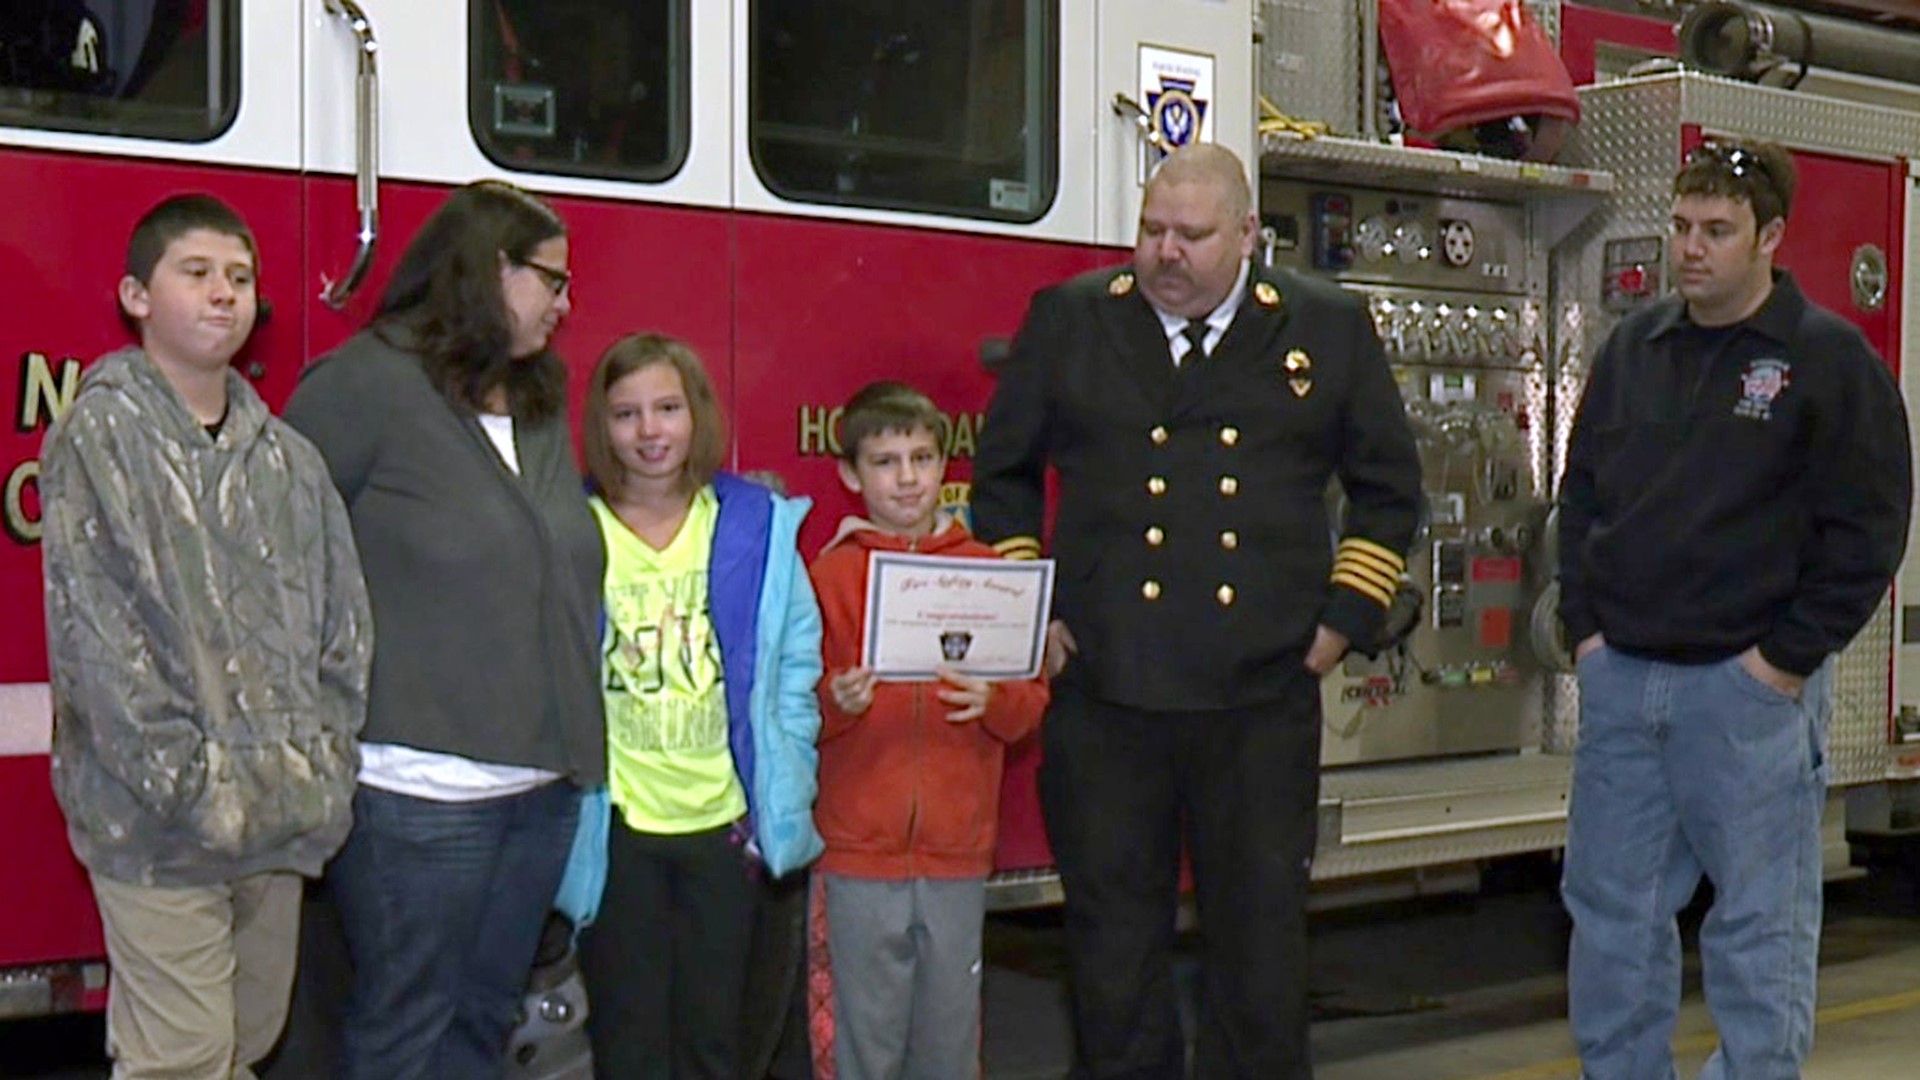 Honesdale Boy Hailed For Saving Family From Fire